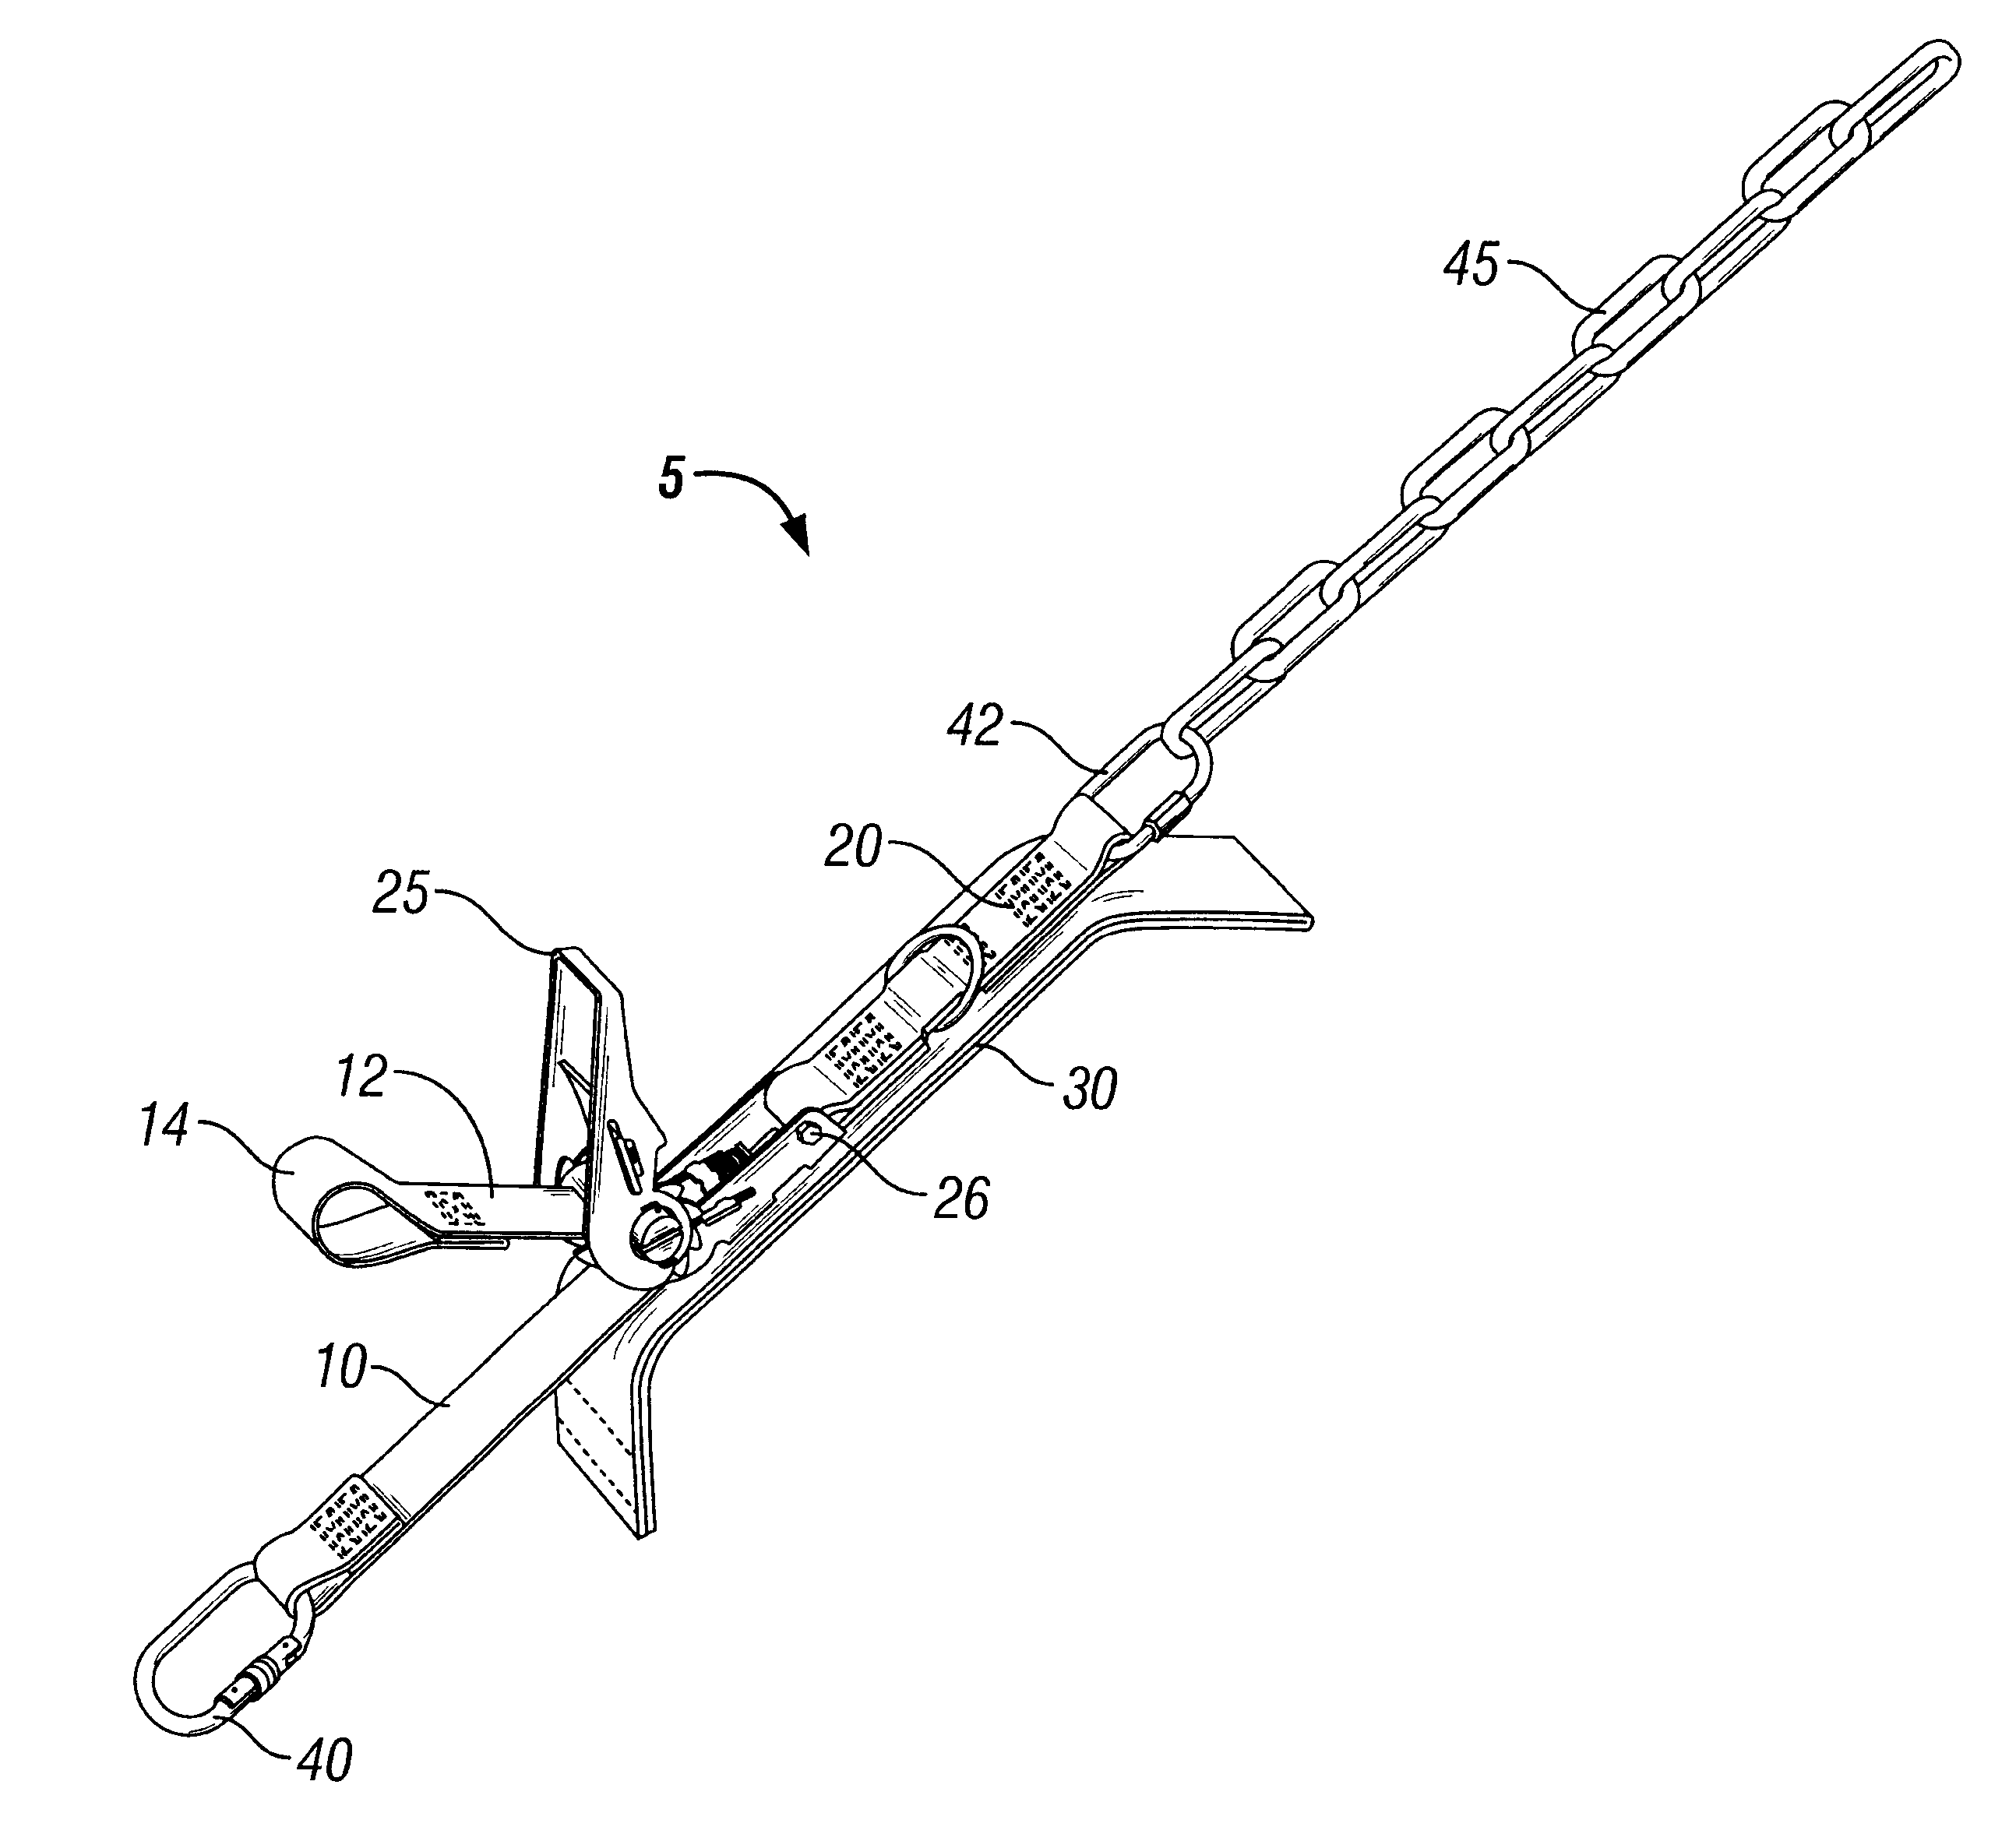 Apparatus for improving tire traction